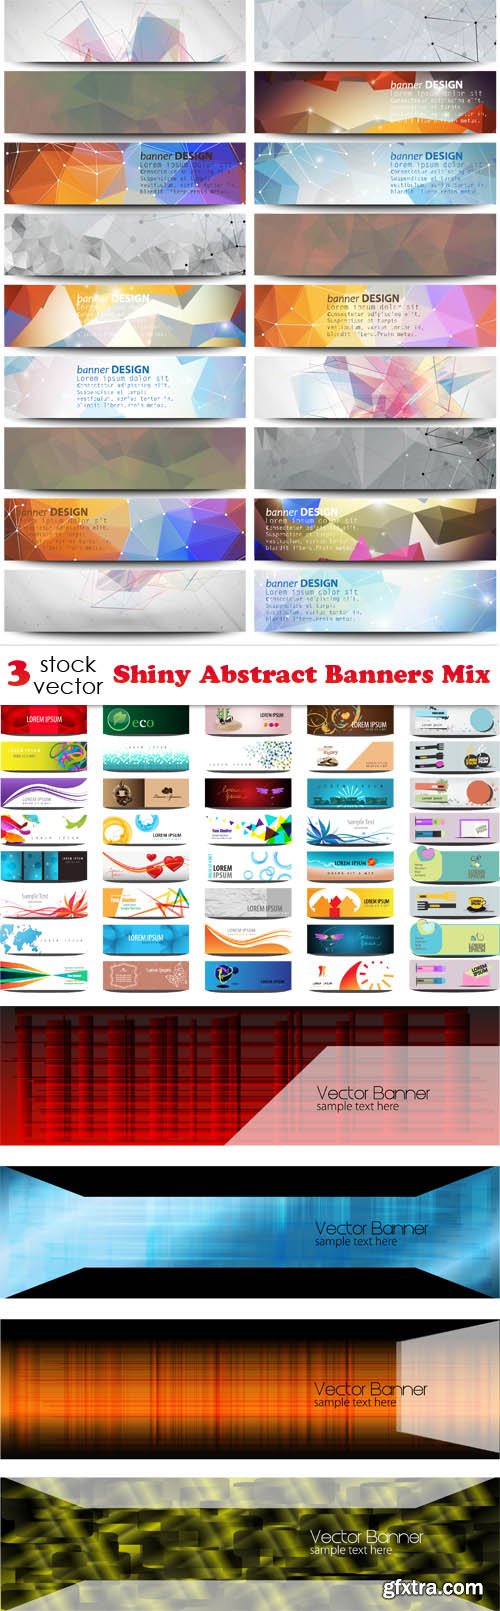 Vectors - Shiny Abstract Banners Mix